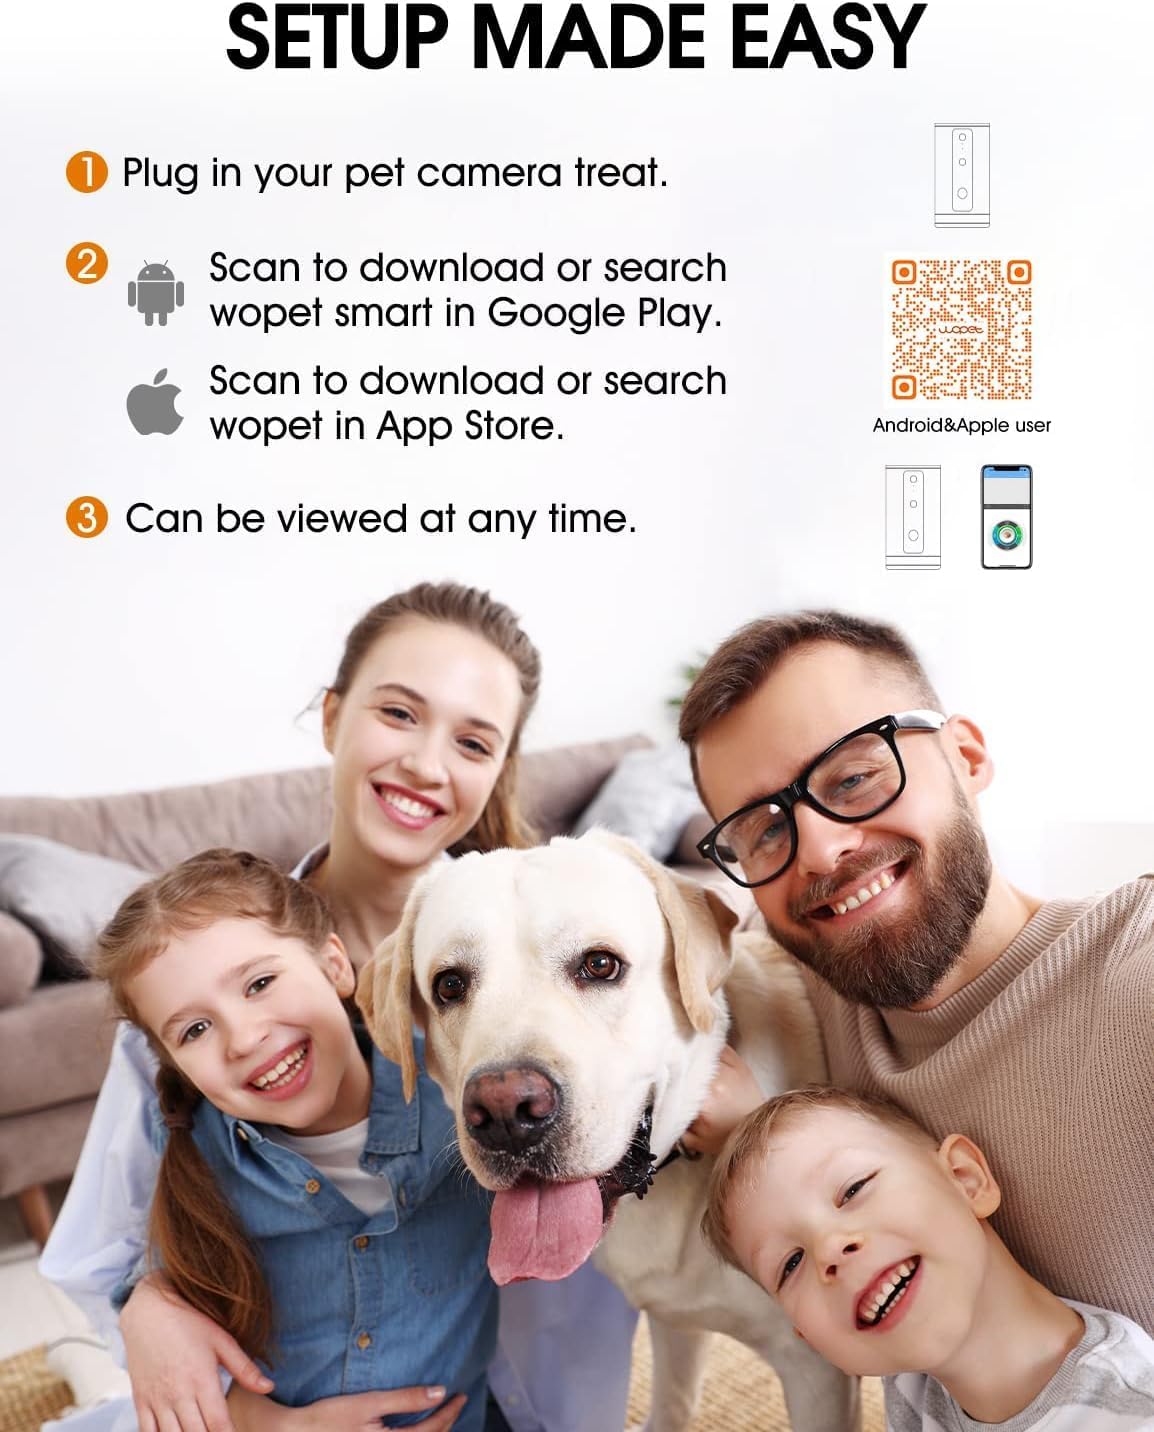 WOPET D01 Plus Dog Camera, 5G WiFi Pet Camera Treat Dispenser for Indoor Monitor Dogs and Cats, Two Way Audio,1080P HD, Night Vision,Phone App Monitor Pet, No Monthly Fee